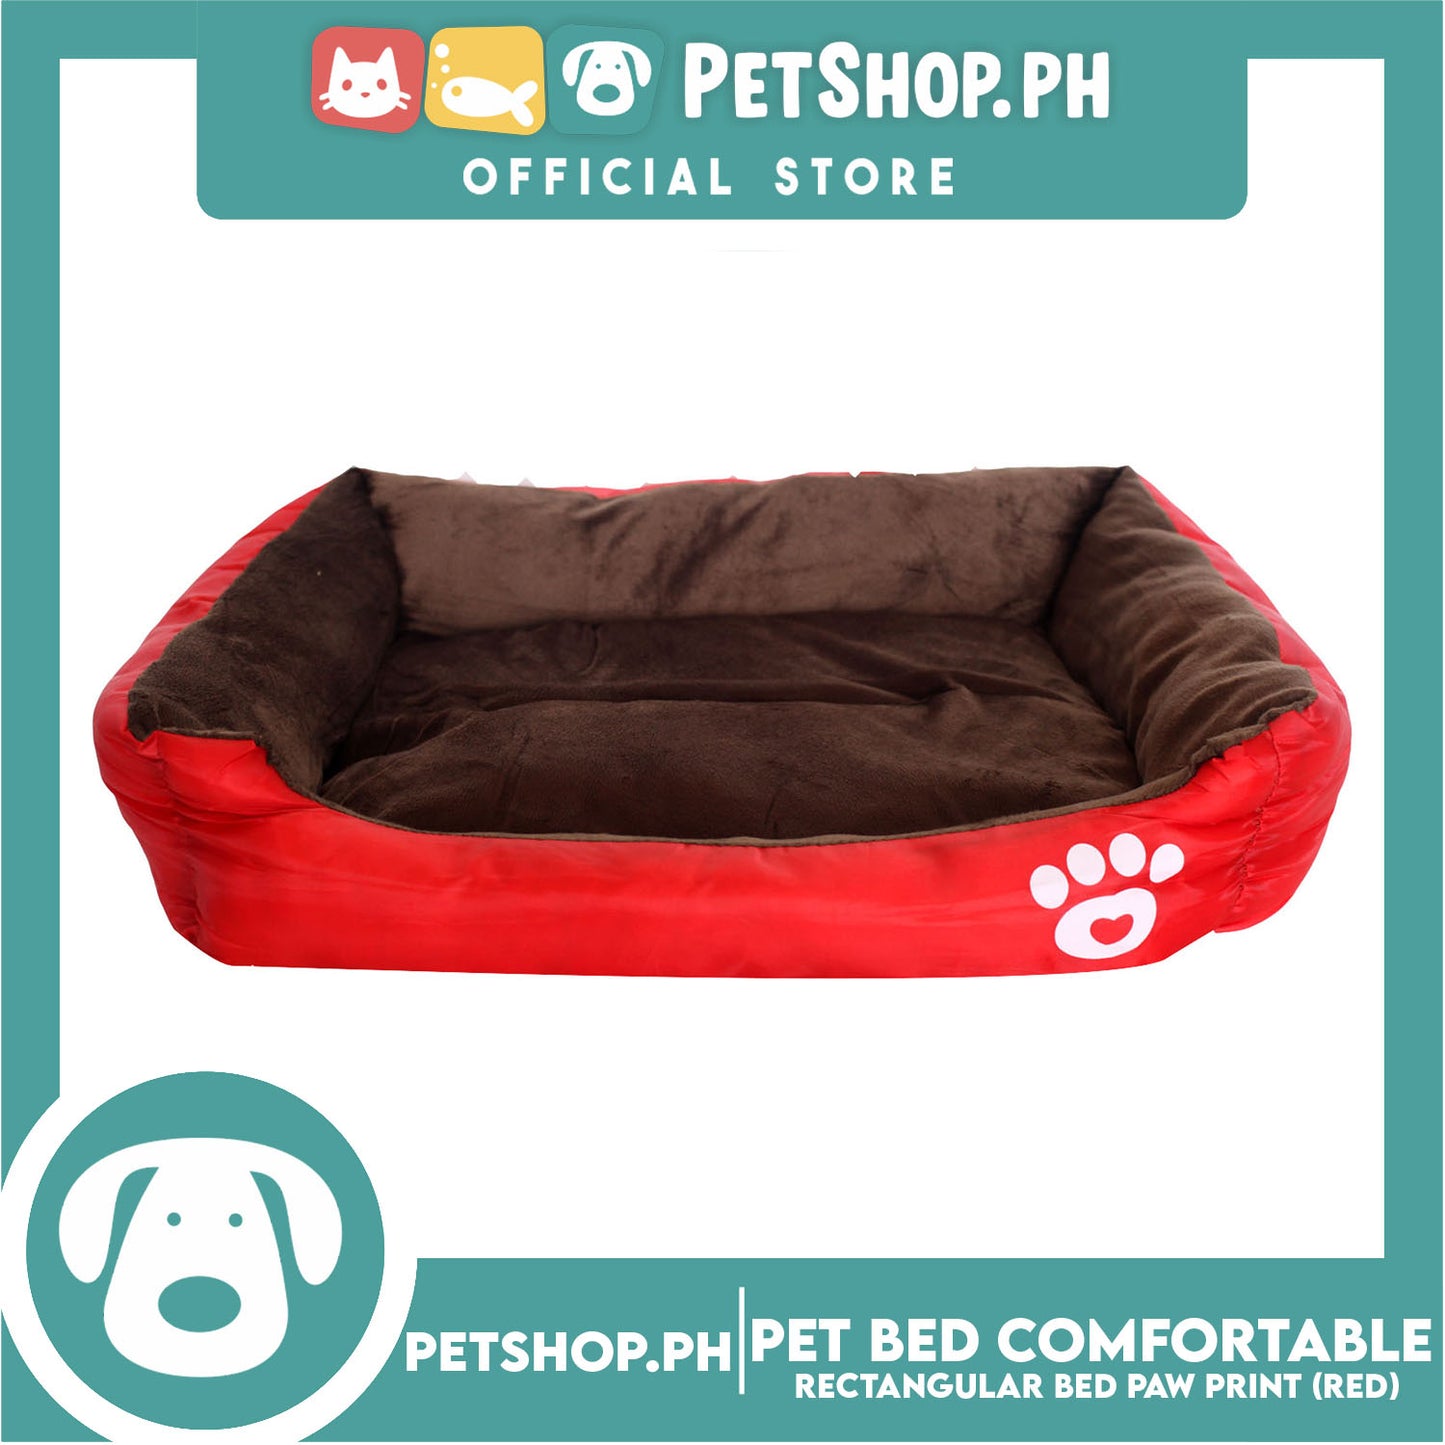 Pet Bed Comfortable Rectangular Pet Bed with Paw Print 50x40x12cm Small for Dogs & Cats (Red)